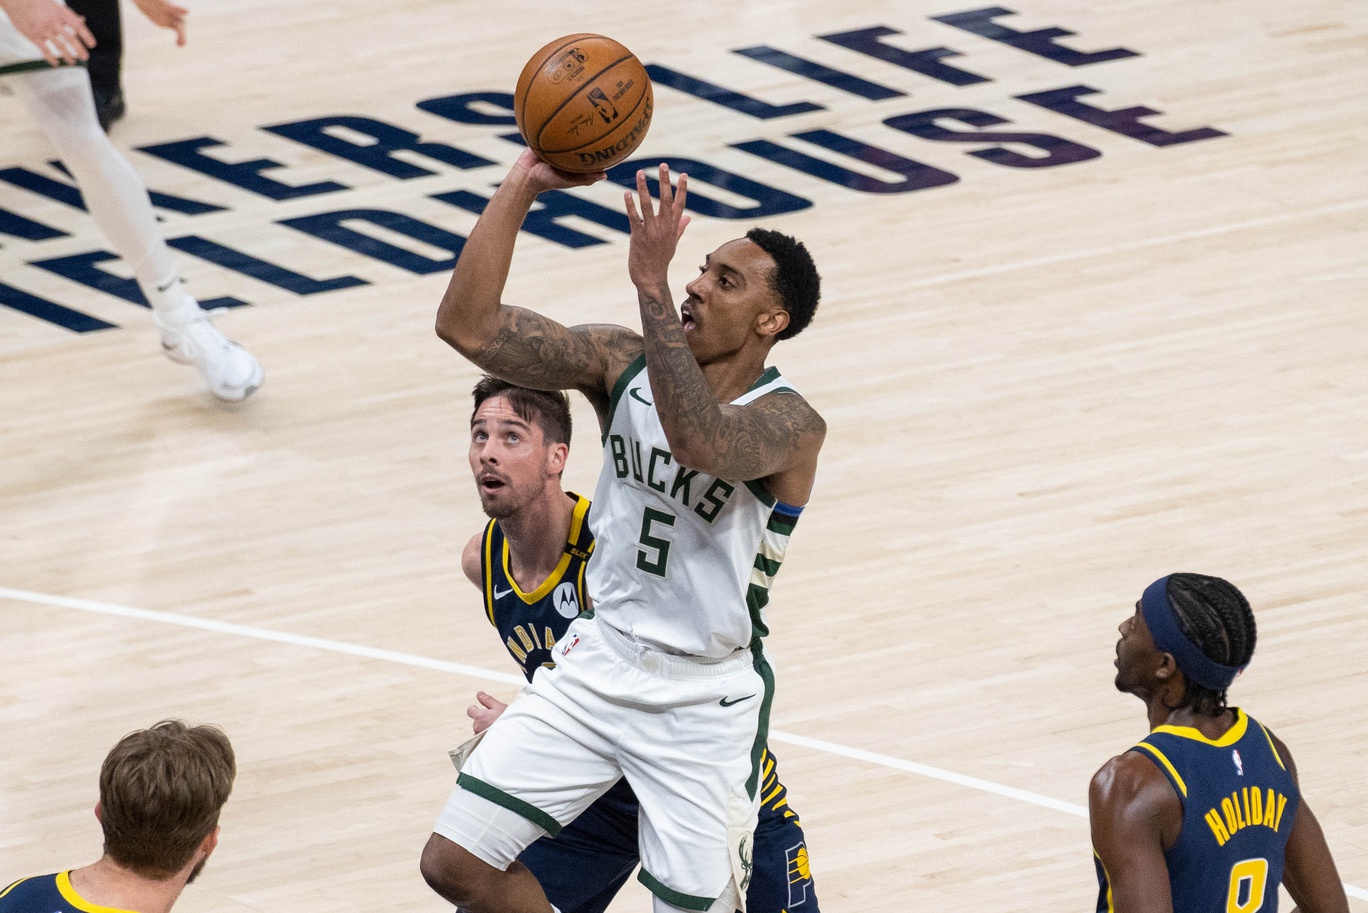 May 13, 2021; Indianapolis, Indiana, USA; Milwaukee Bucks guard Jeff Teague (5) shoots the ball while Indiana Pacers guard T.J. McConnell (9) defends in the first quarter at Bankers Life Fieldhouse. Mandatory Credit: Trevor Ruszkowski-USA TODAY Sports NBA News